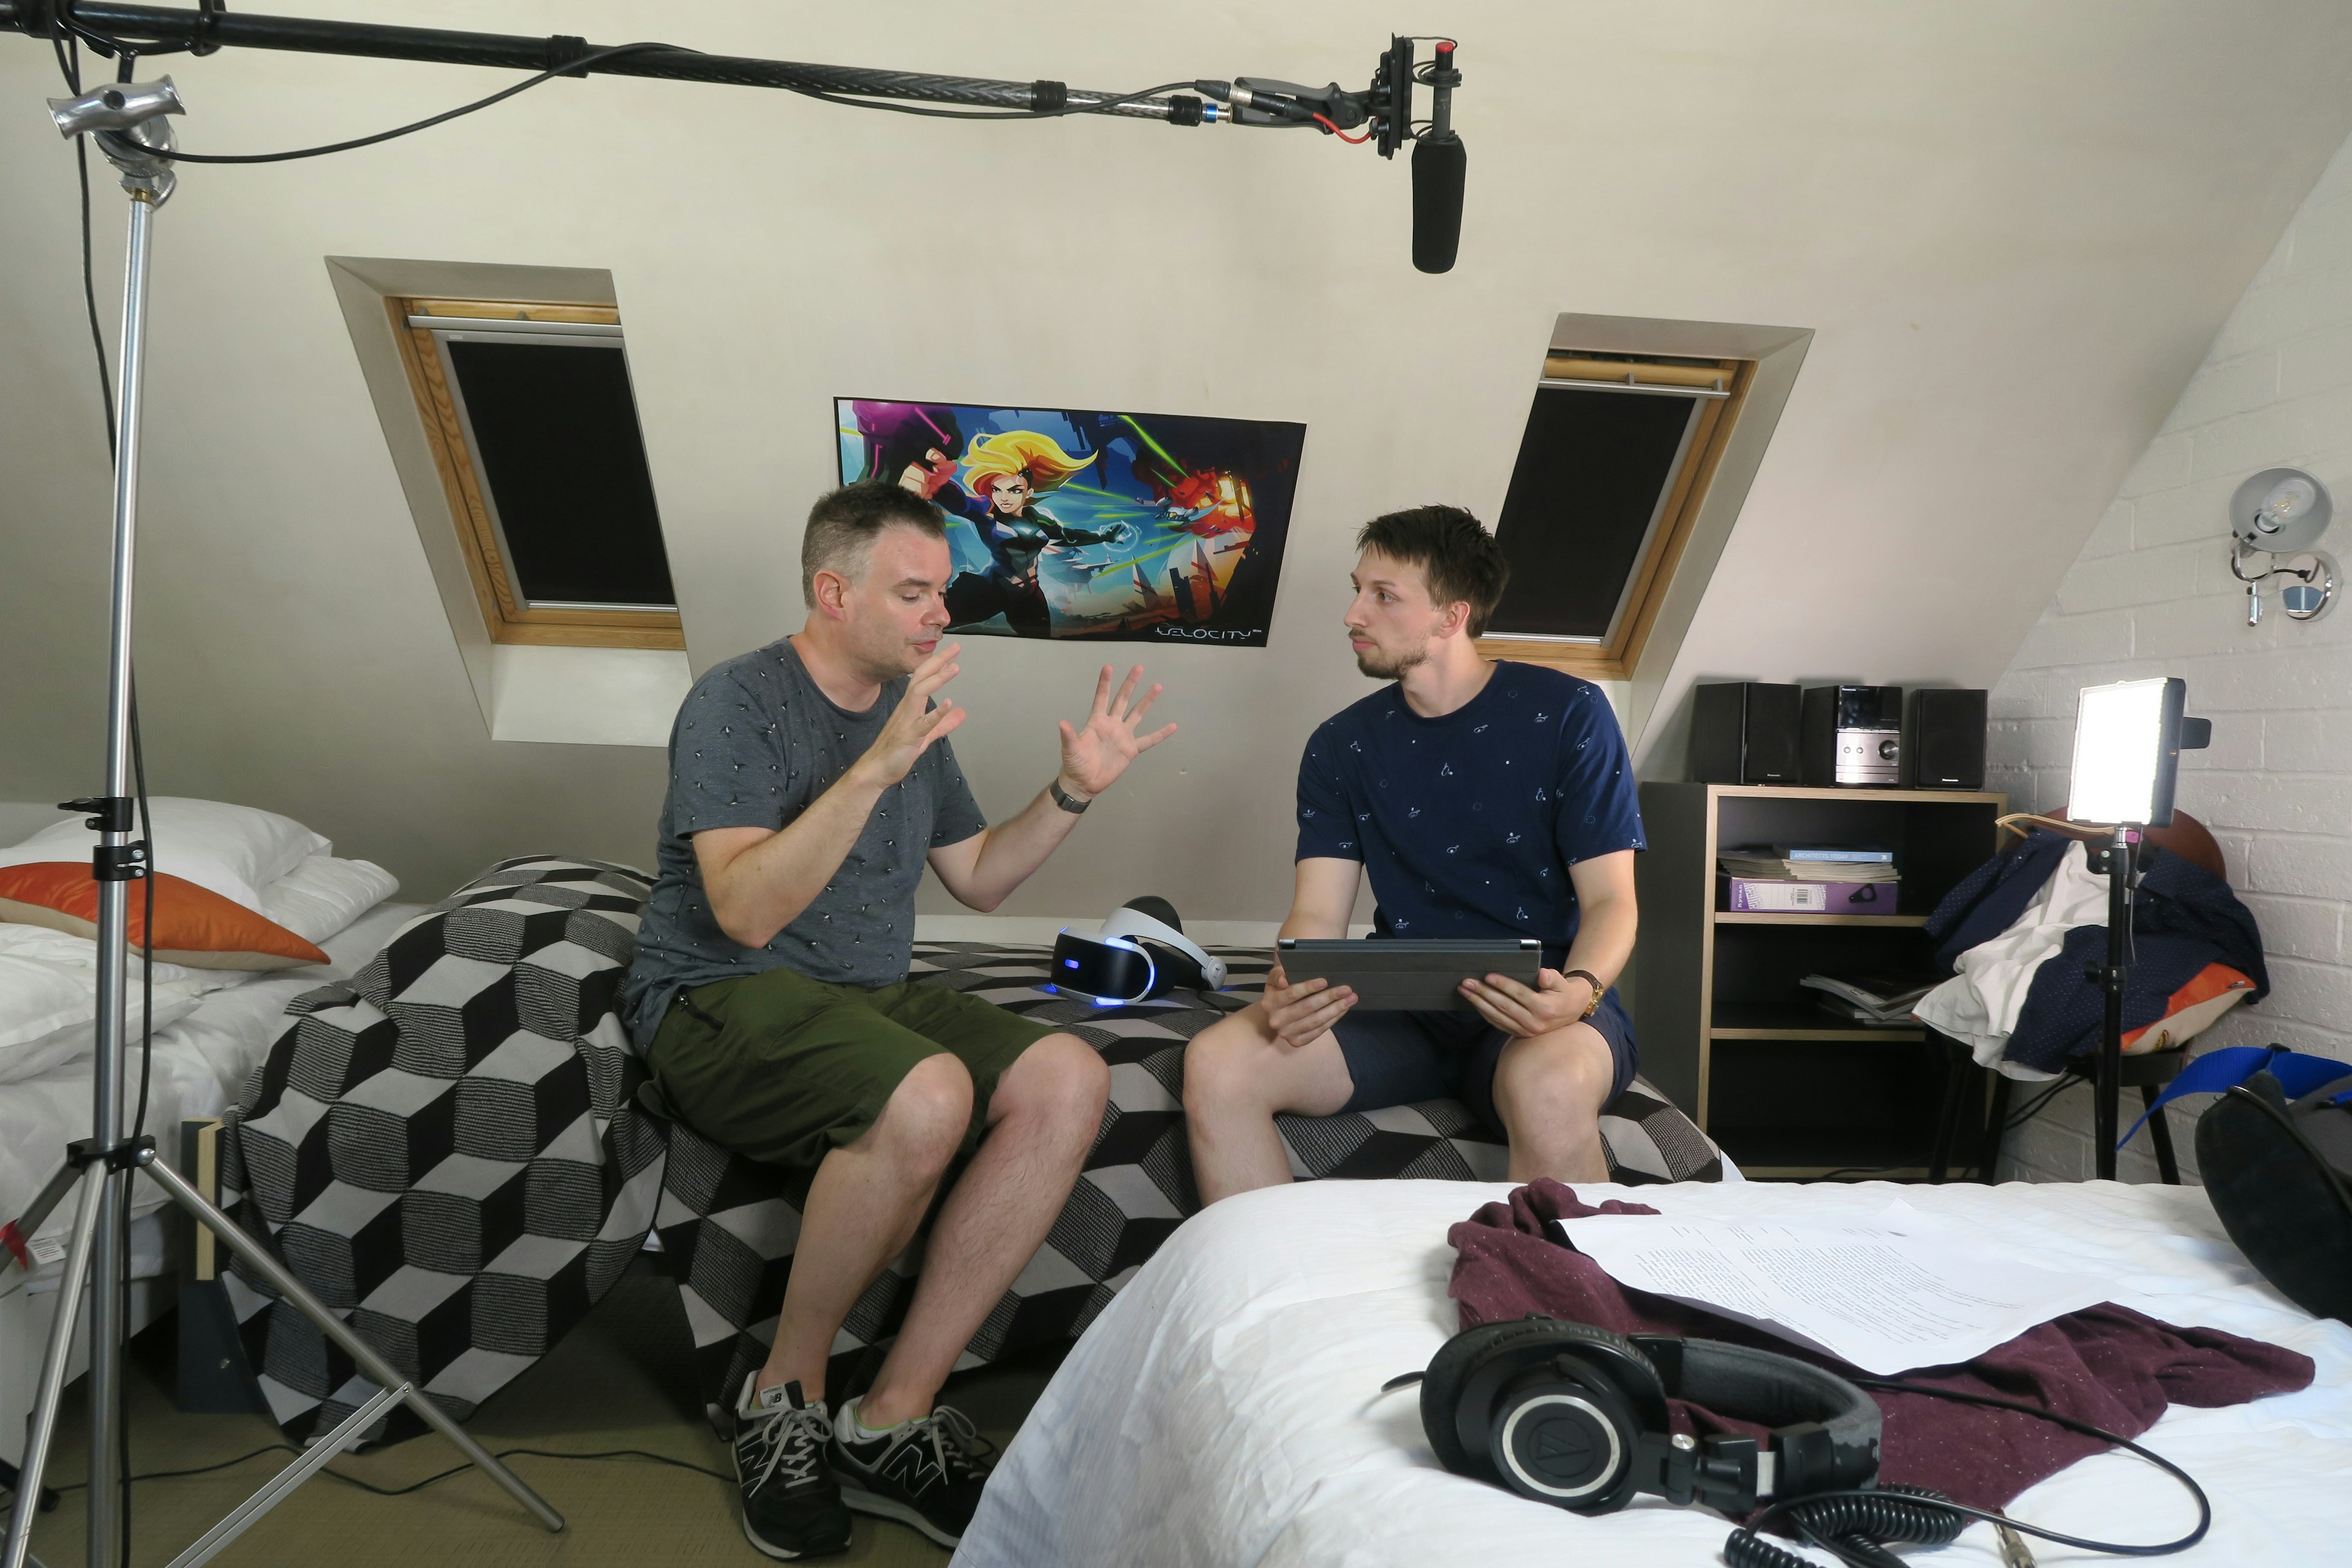 Game and UI artist Paul Simpson describbes the new Futurlab Sony Playstation VR game to actor Adam Leadbitter, behind the scenes on the Big Egg Futurlab trailer shoot